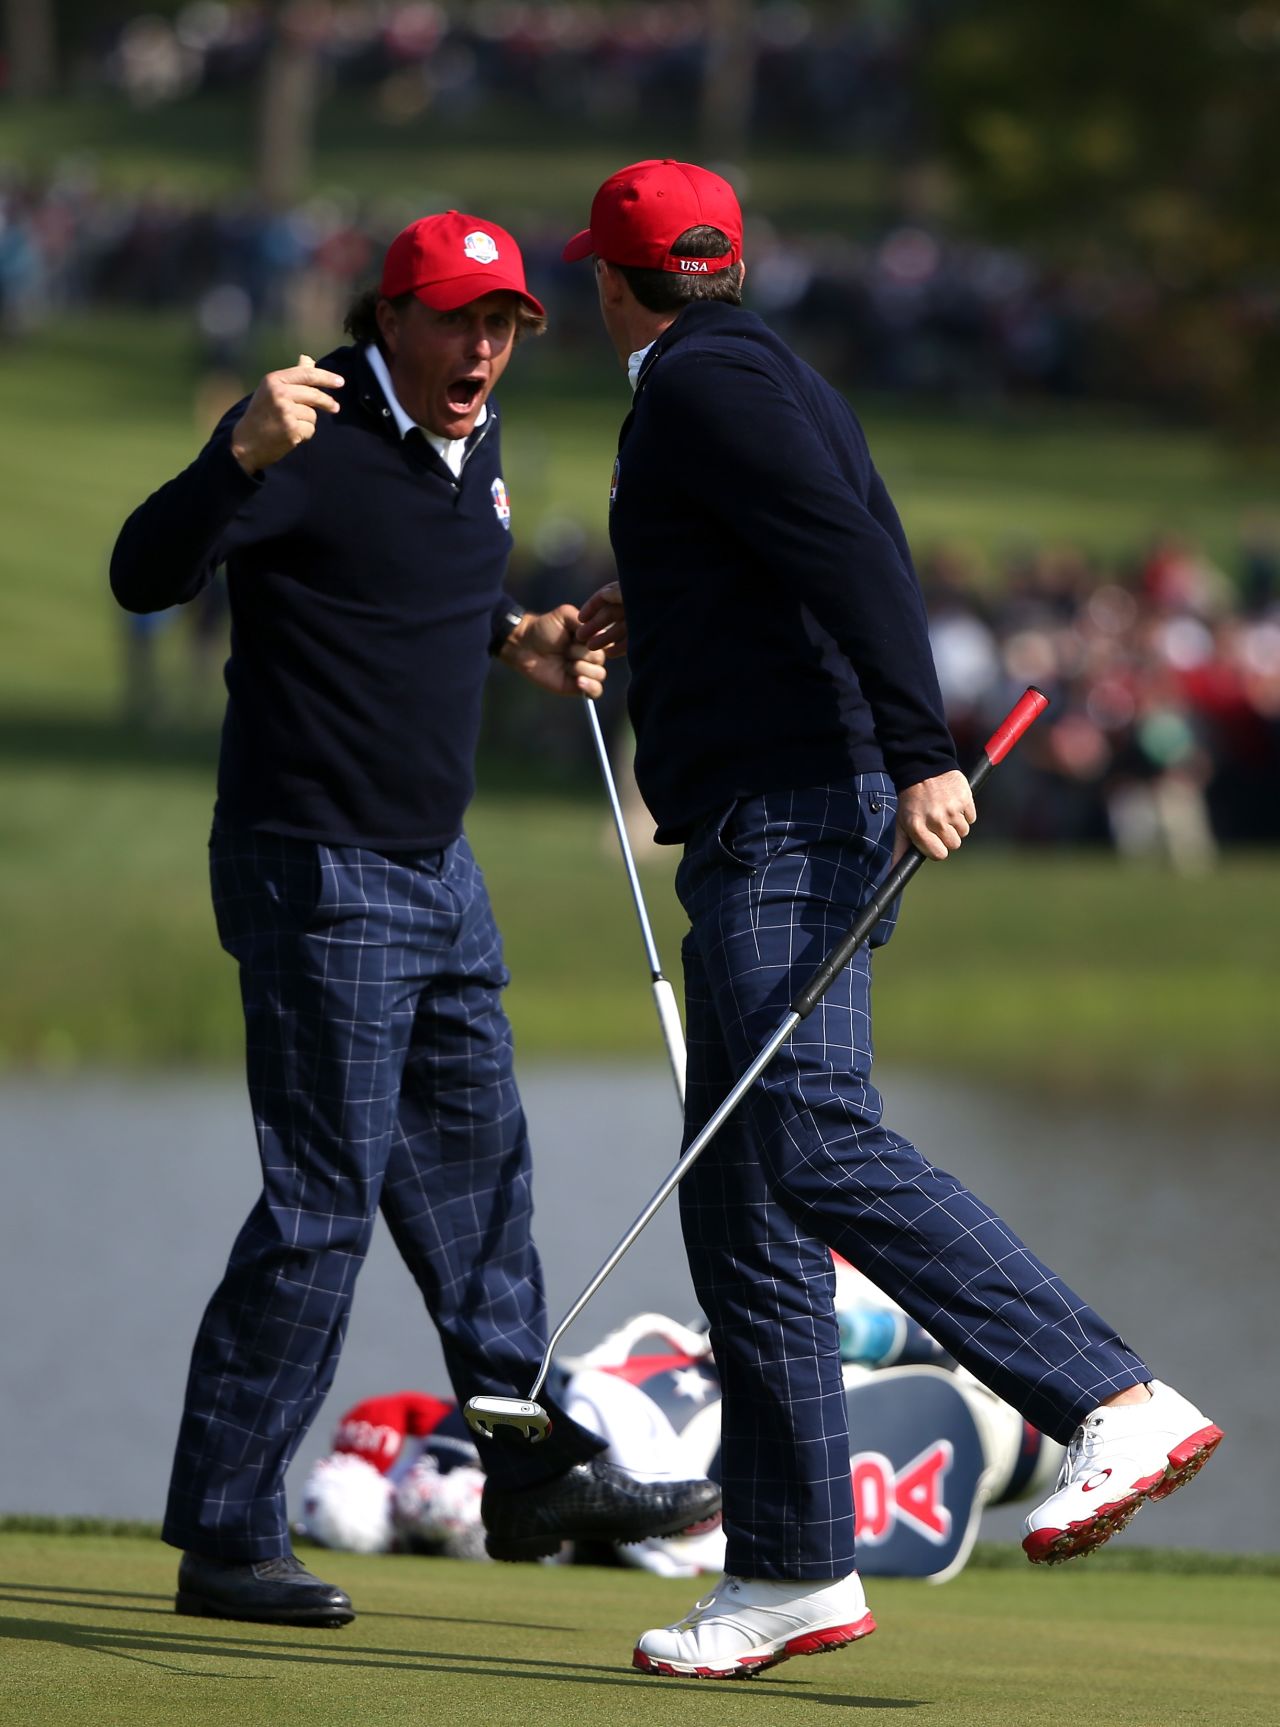 Phil Mickelson and Keegan Bradley celebrate on the 15th green after defeating Luke Donald and Sergio Garcia during the morning foursome matches on Friday.